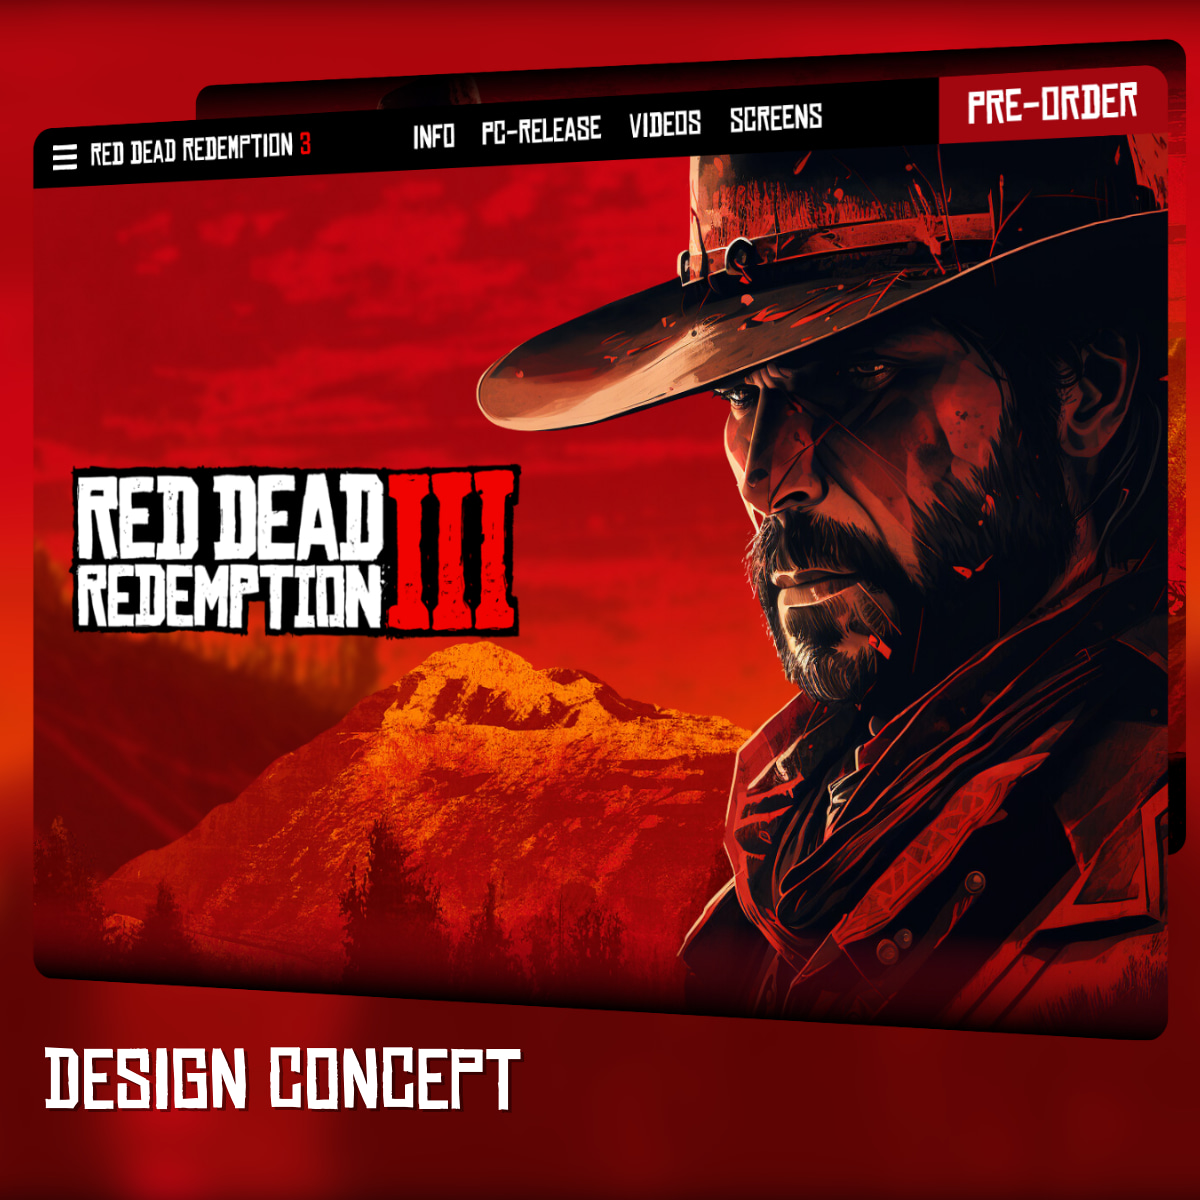 Red Dead Redemption 3: The GENESIS, What do you think of my concept for new  game cover? : r/reddeadredemption